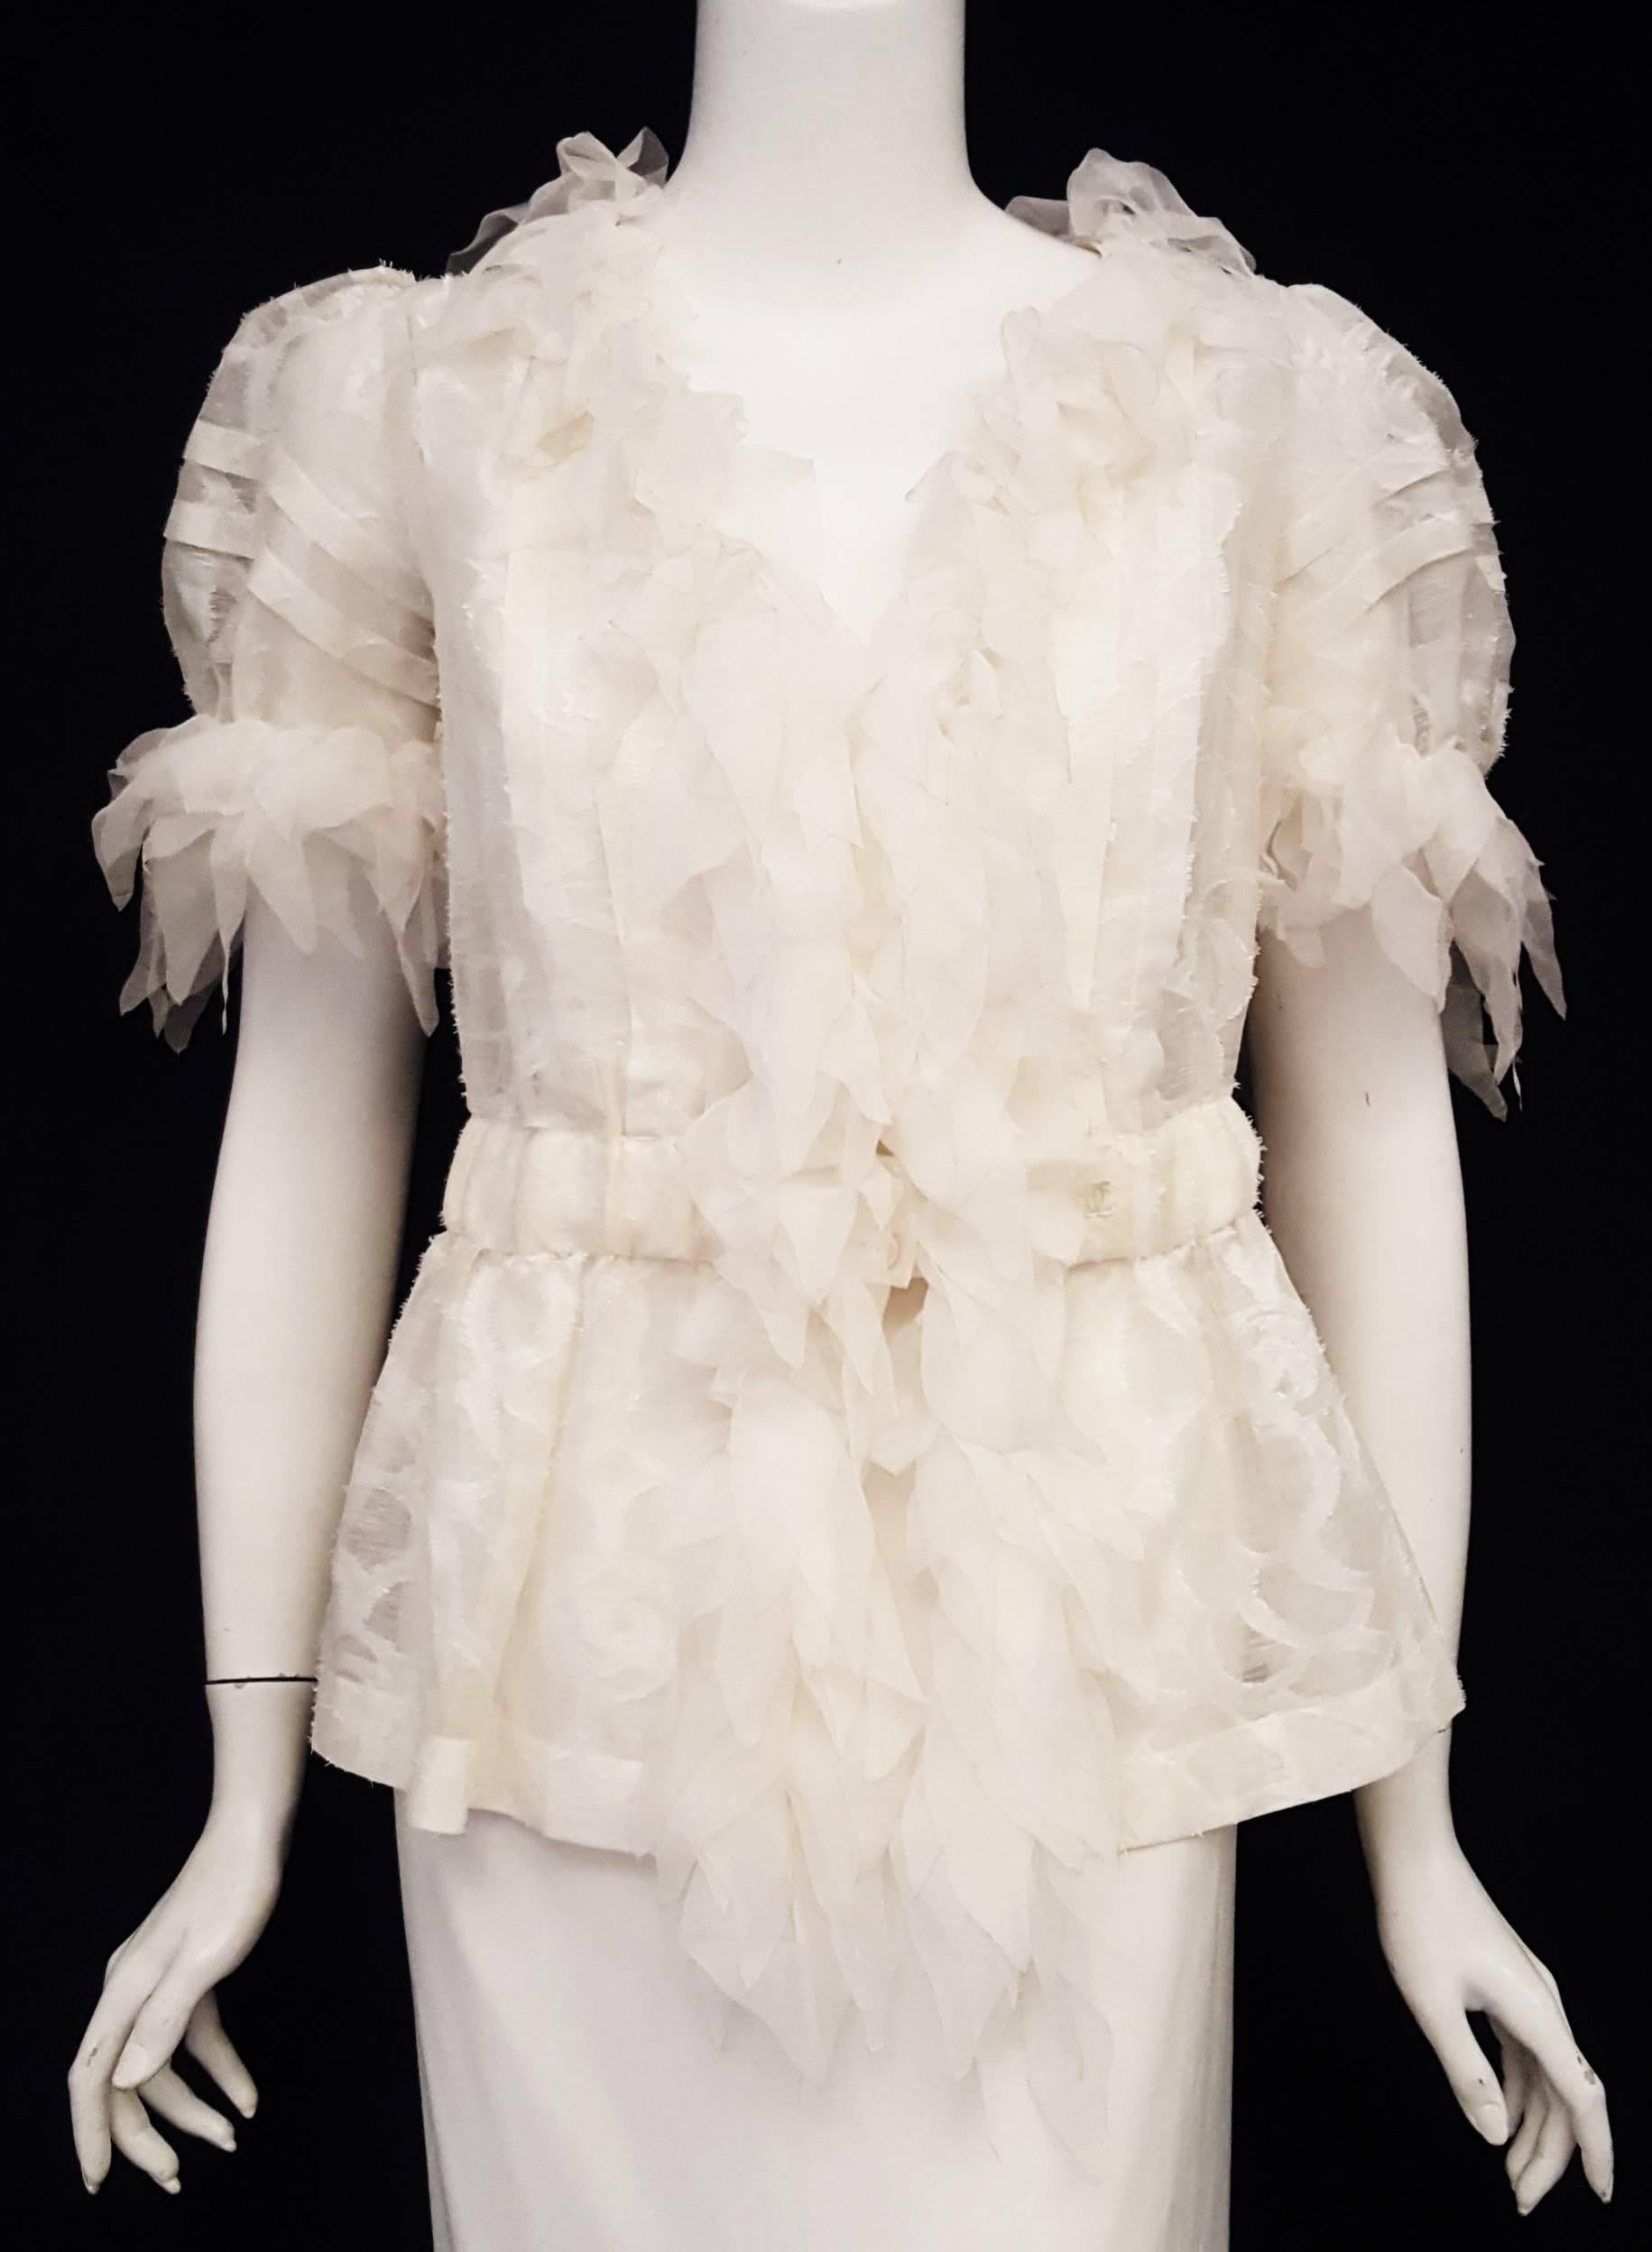 Chanel features white on white on this sheer frayed silk short sleeve blouse with petals /leaves on the collar and at front opening for a sensual cascade from neck to hem.  The short sleeves are also decorated with the unique petal ruffles.  On this